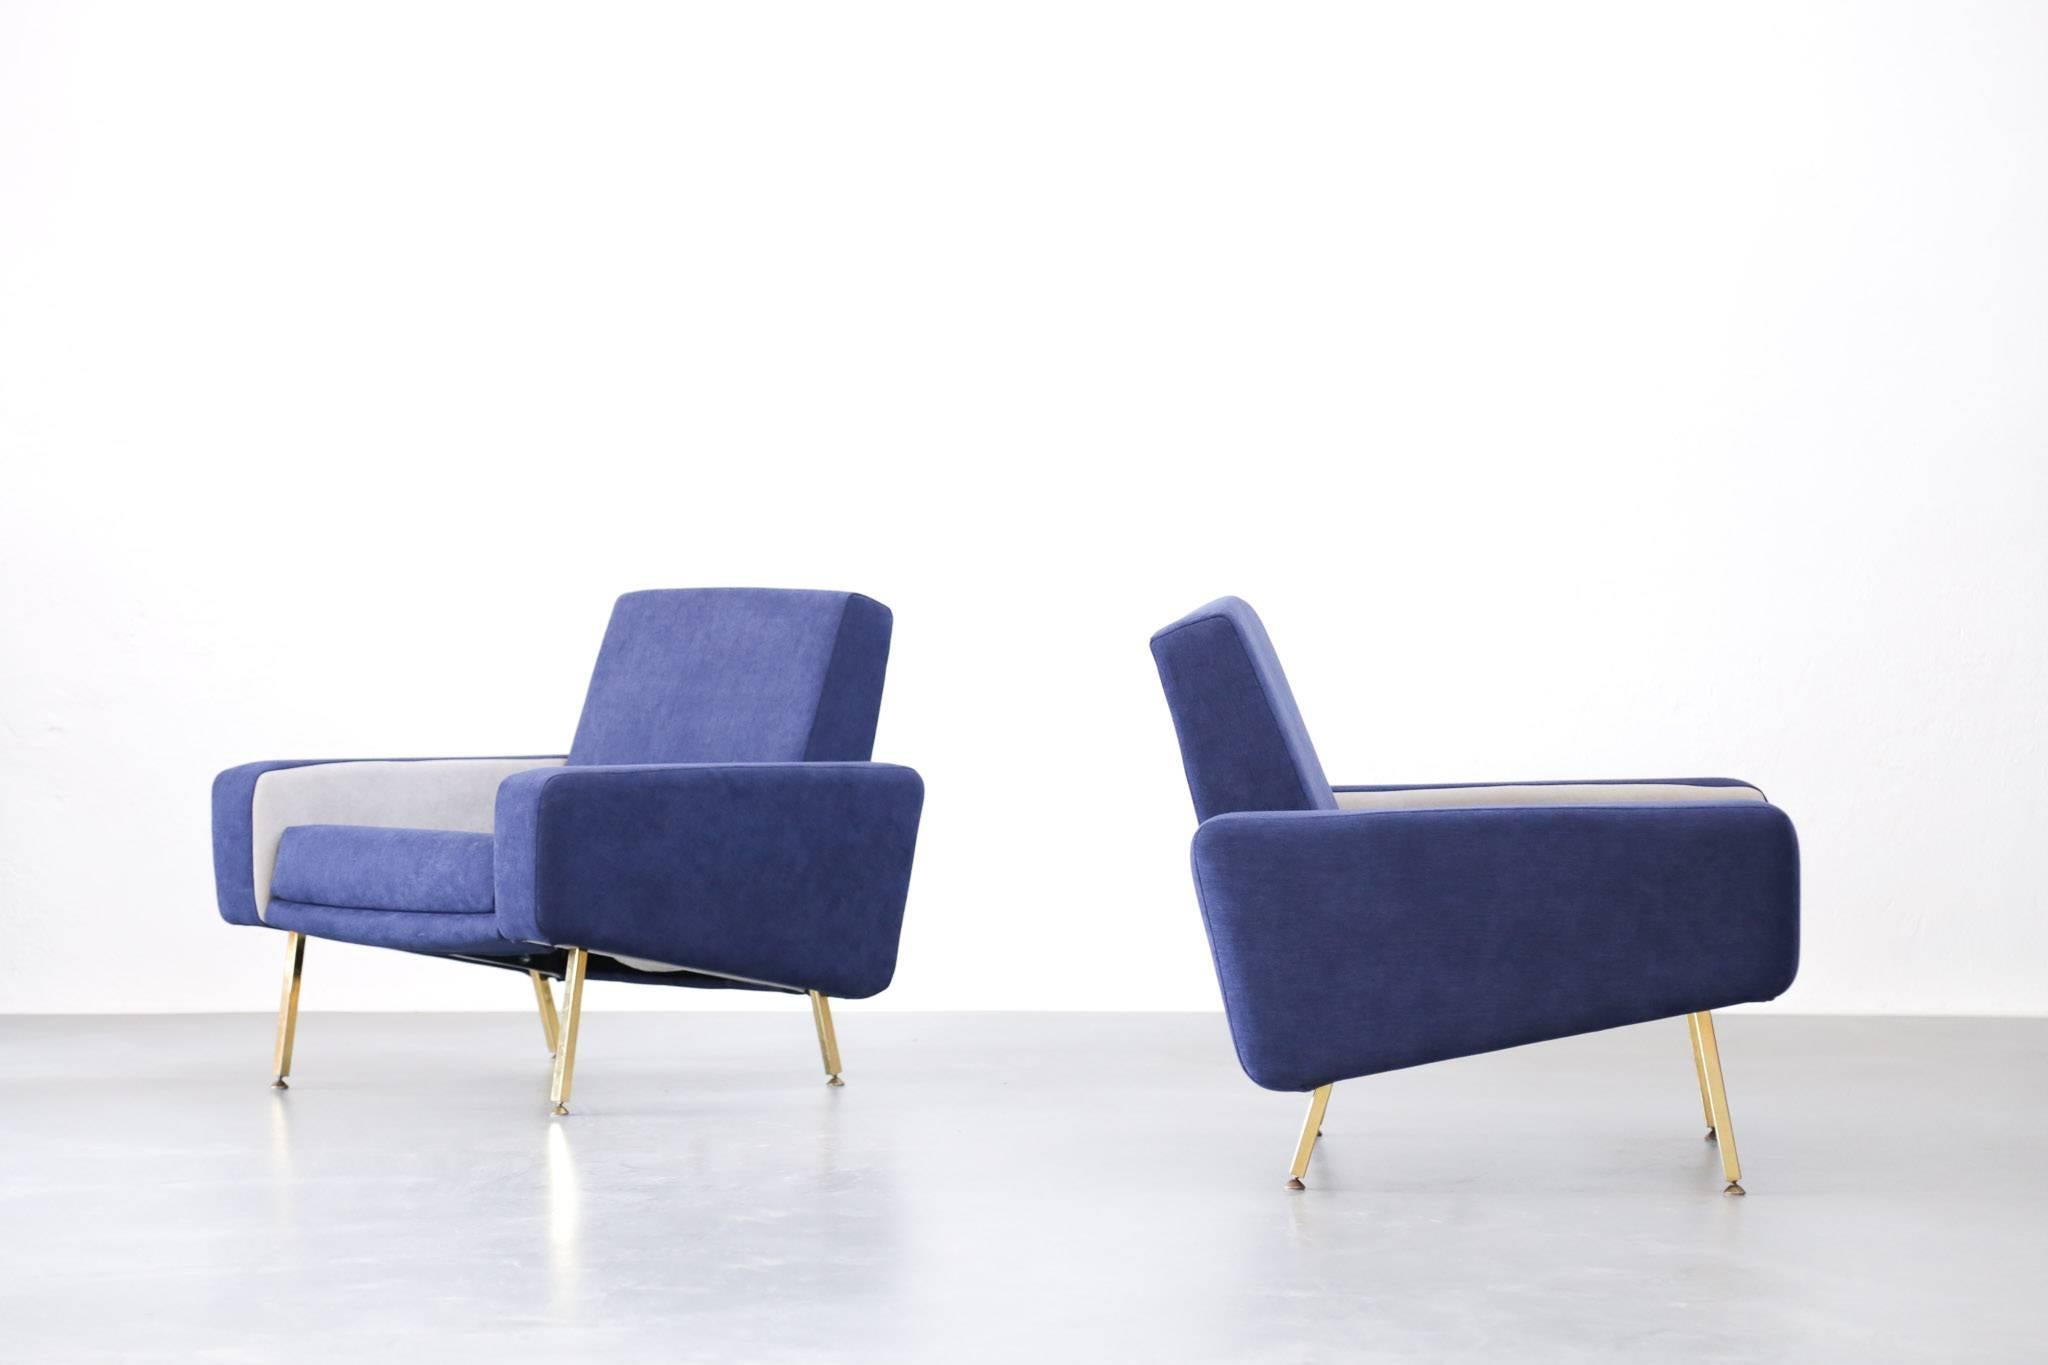 Rare pair of midcentury armchairs designed by Pierre Guariche for Airborn with rare feet in gilt metal.
Armchairs with new upholstery, perfect condition.